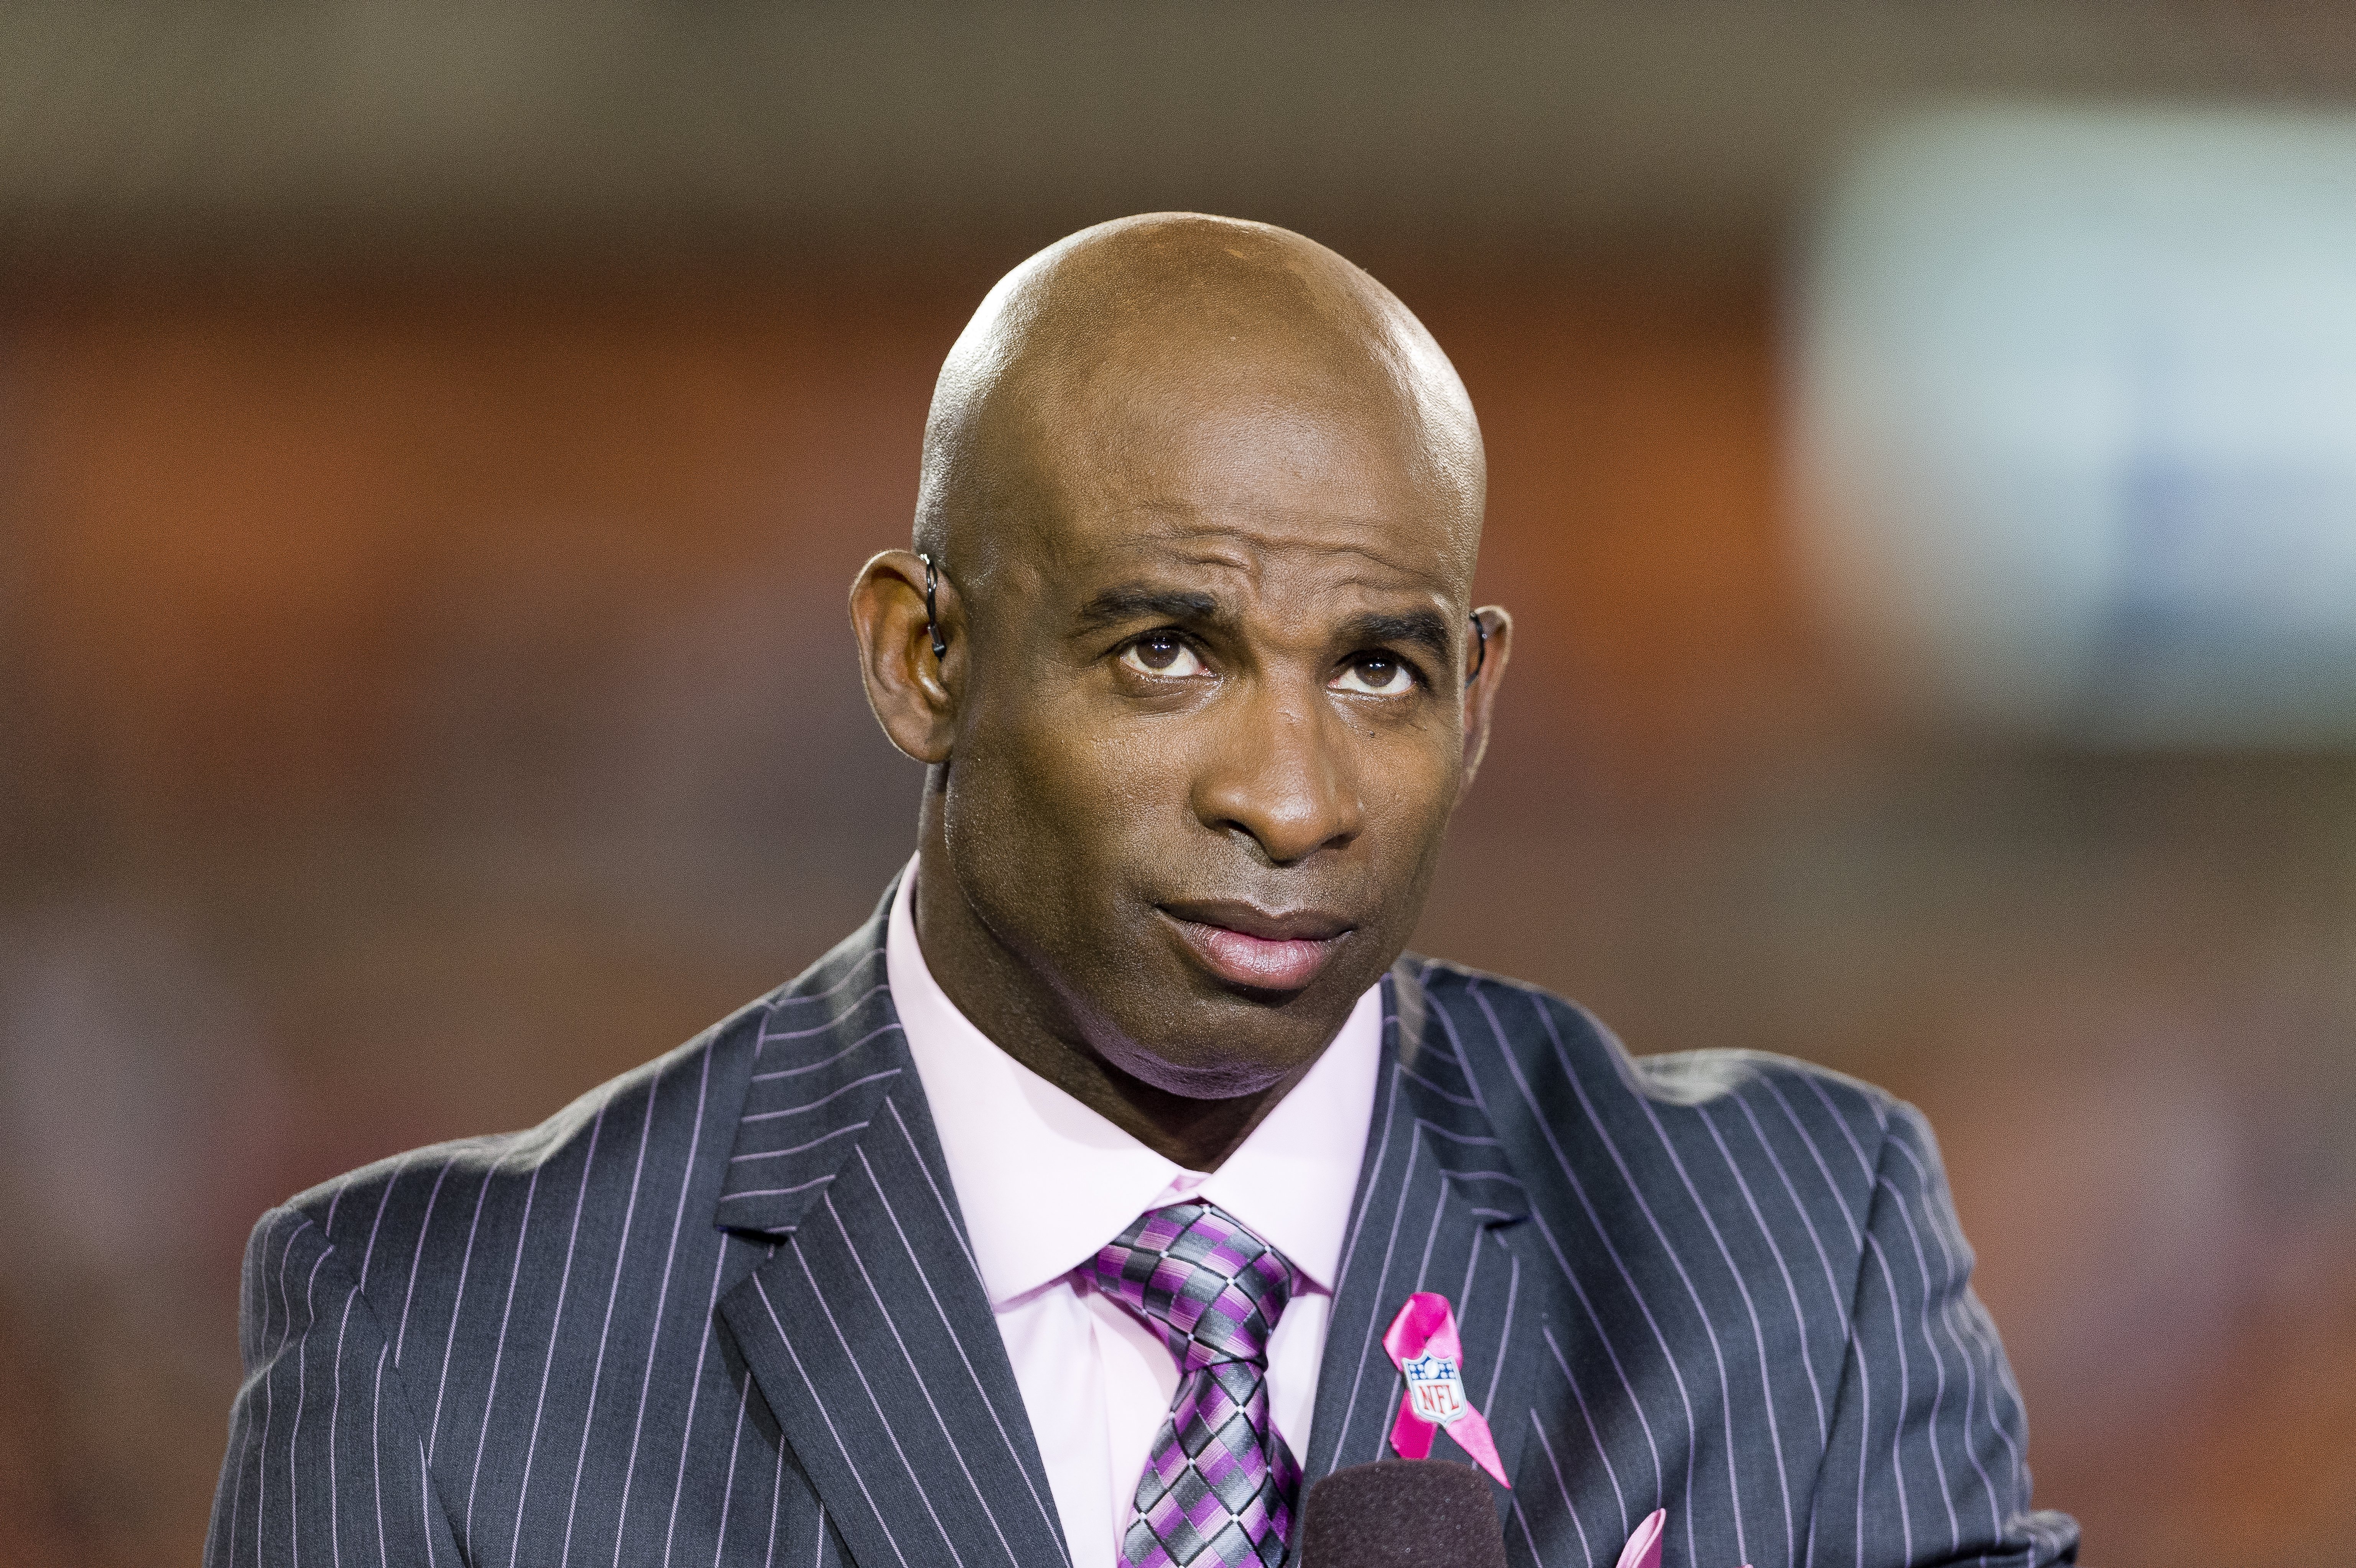 Deion Sanders on the set of NFL Network prior to the game between the Buffalo Bills and the Cleveland Browns at FirstEnergy Stadium in Cleveland, Ohio | Photo: Jason Miller/Getty Images